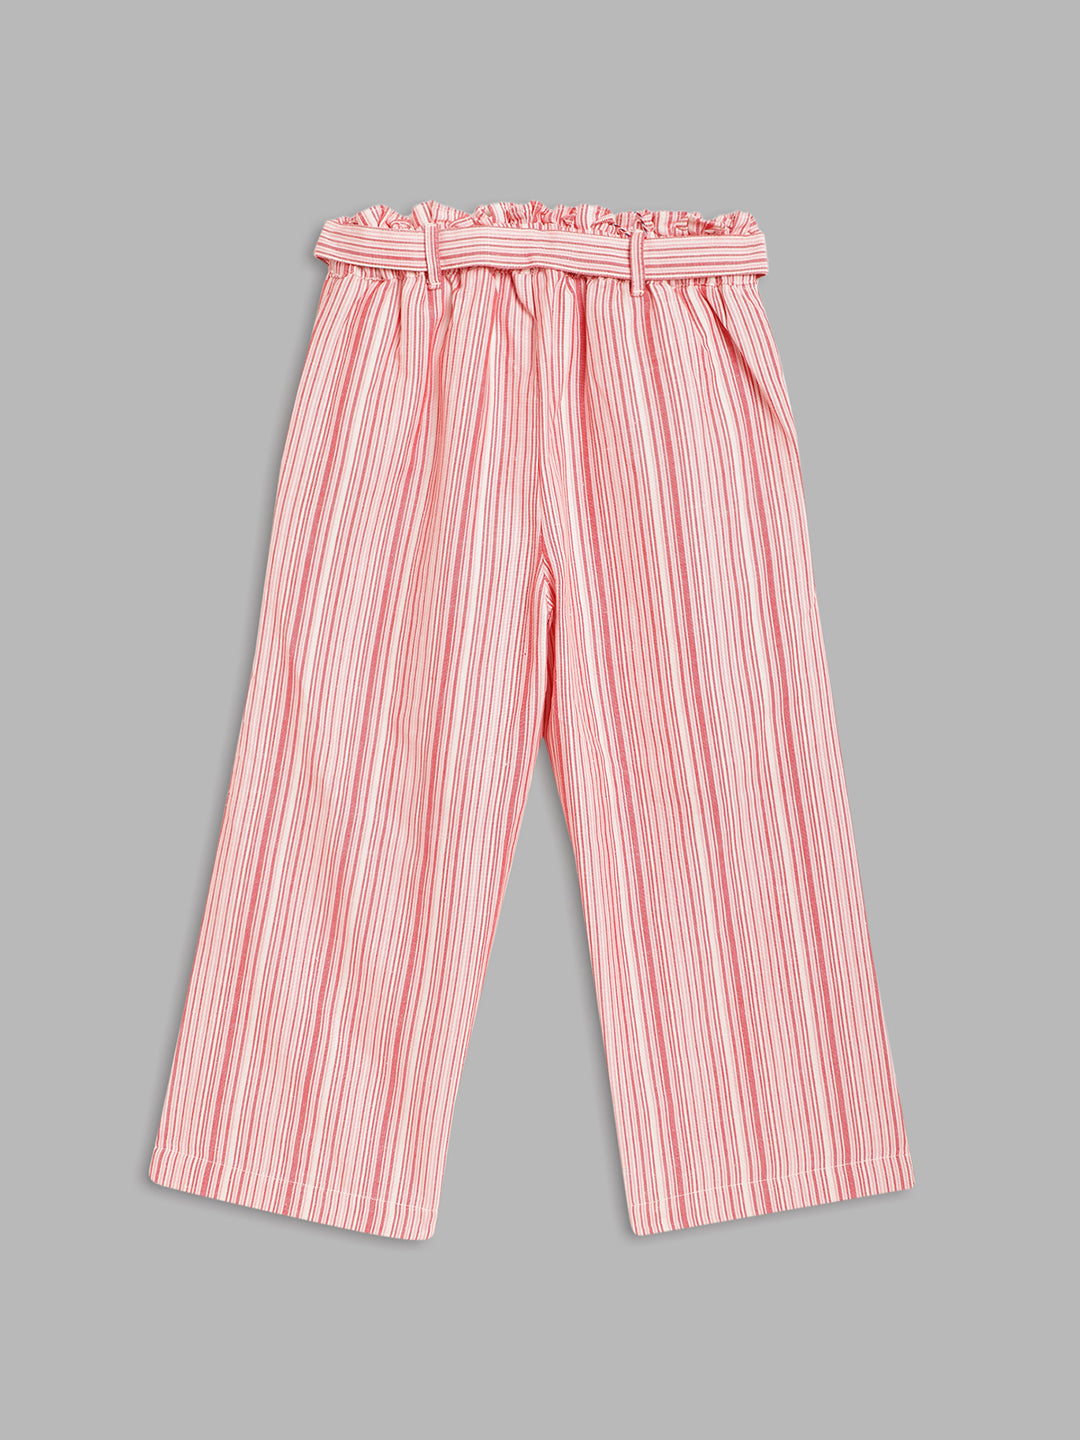 Elle Kids Girls Red Striped Straight Fit Trouser